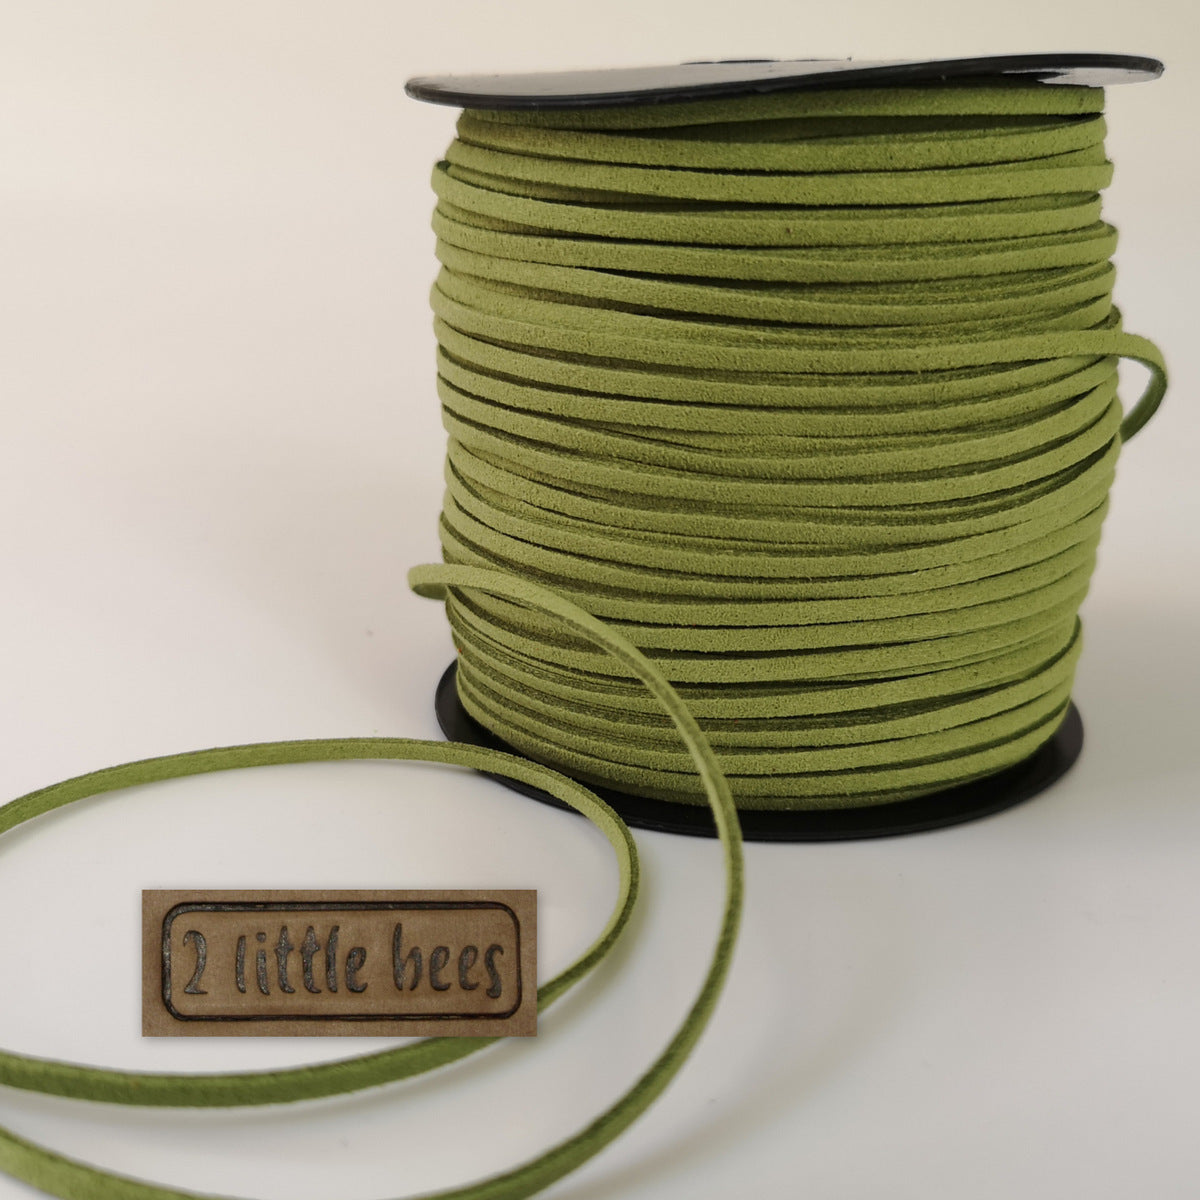 Flat Faux Suede Leather String. Green - 2 little bees